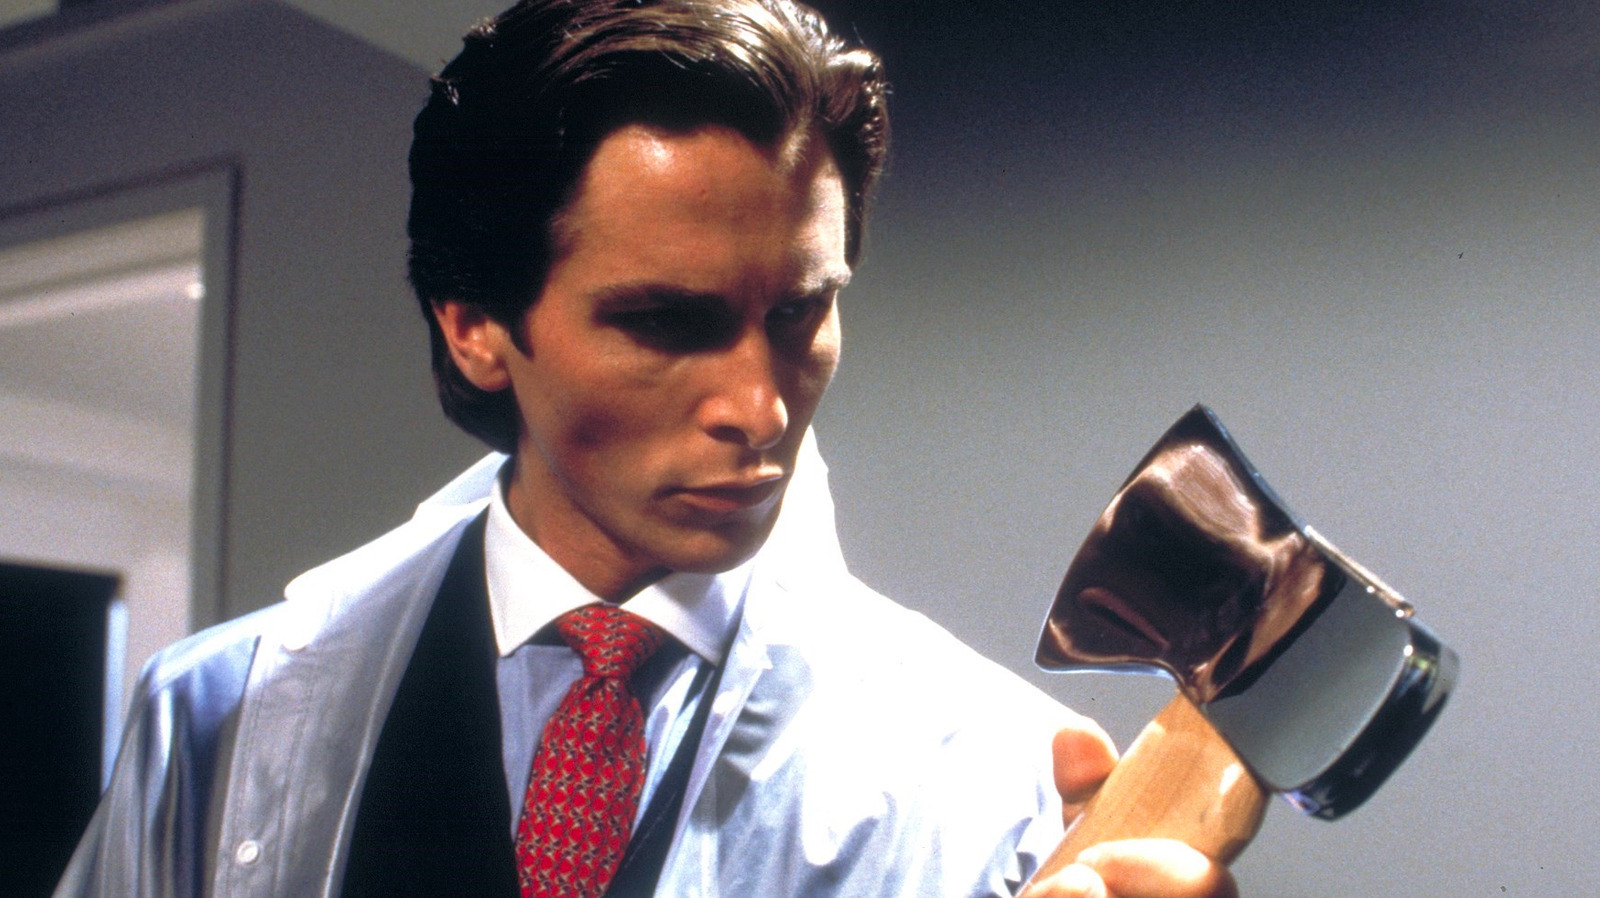 What Does the Ending of American Psycho mean?